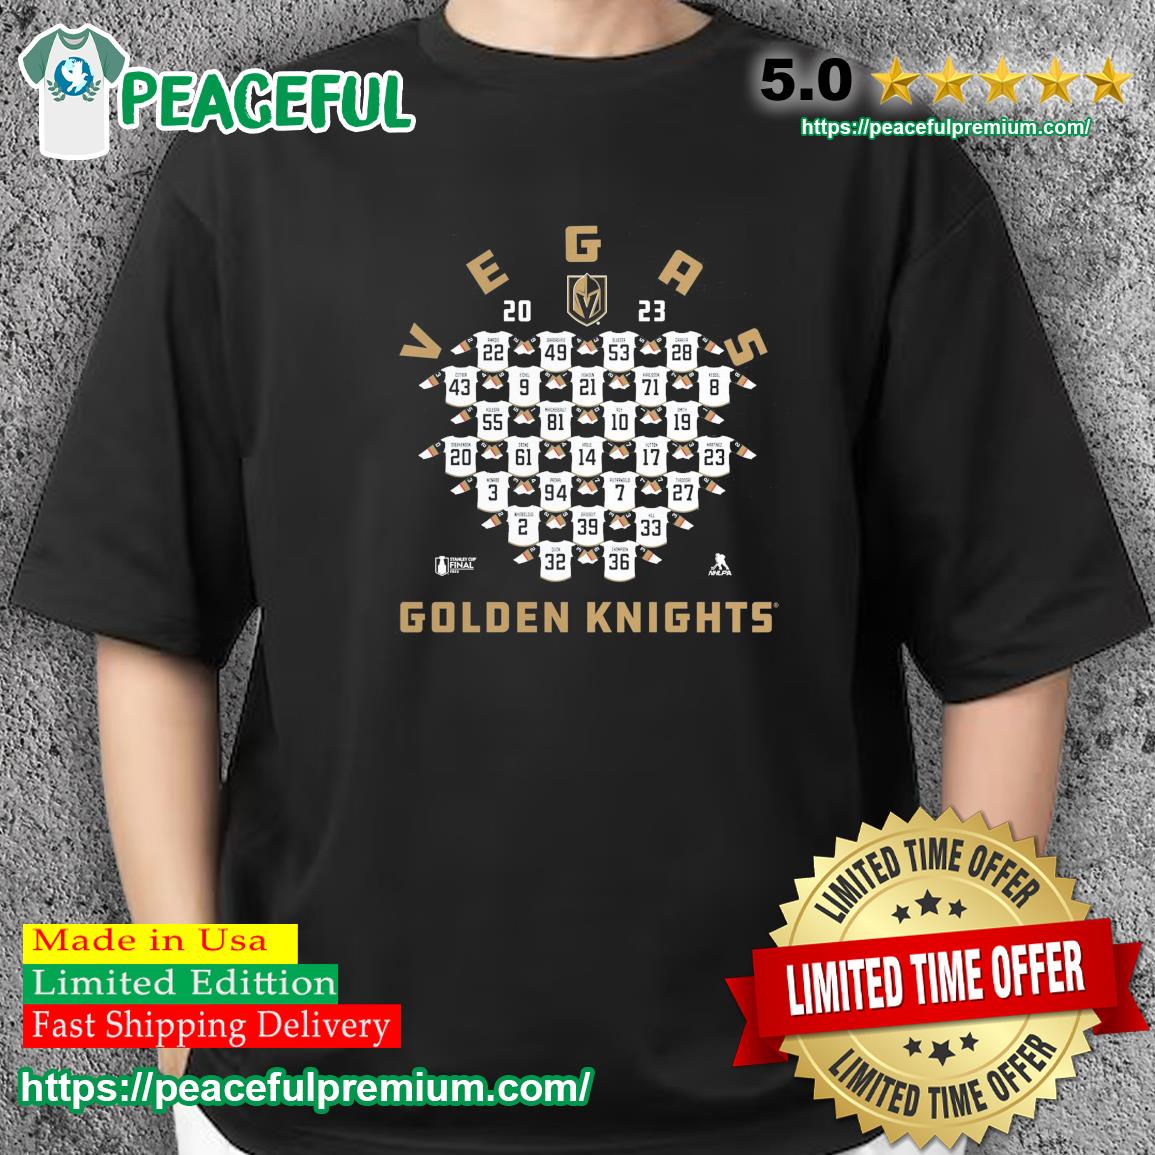 Official 2023 Stanley Cup Champions Vegas Golden Knights Mascot Shirt -  Shibtee Clothing